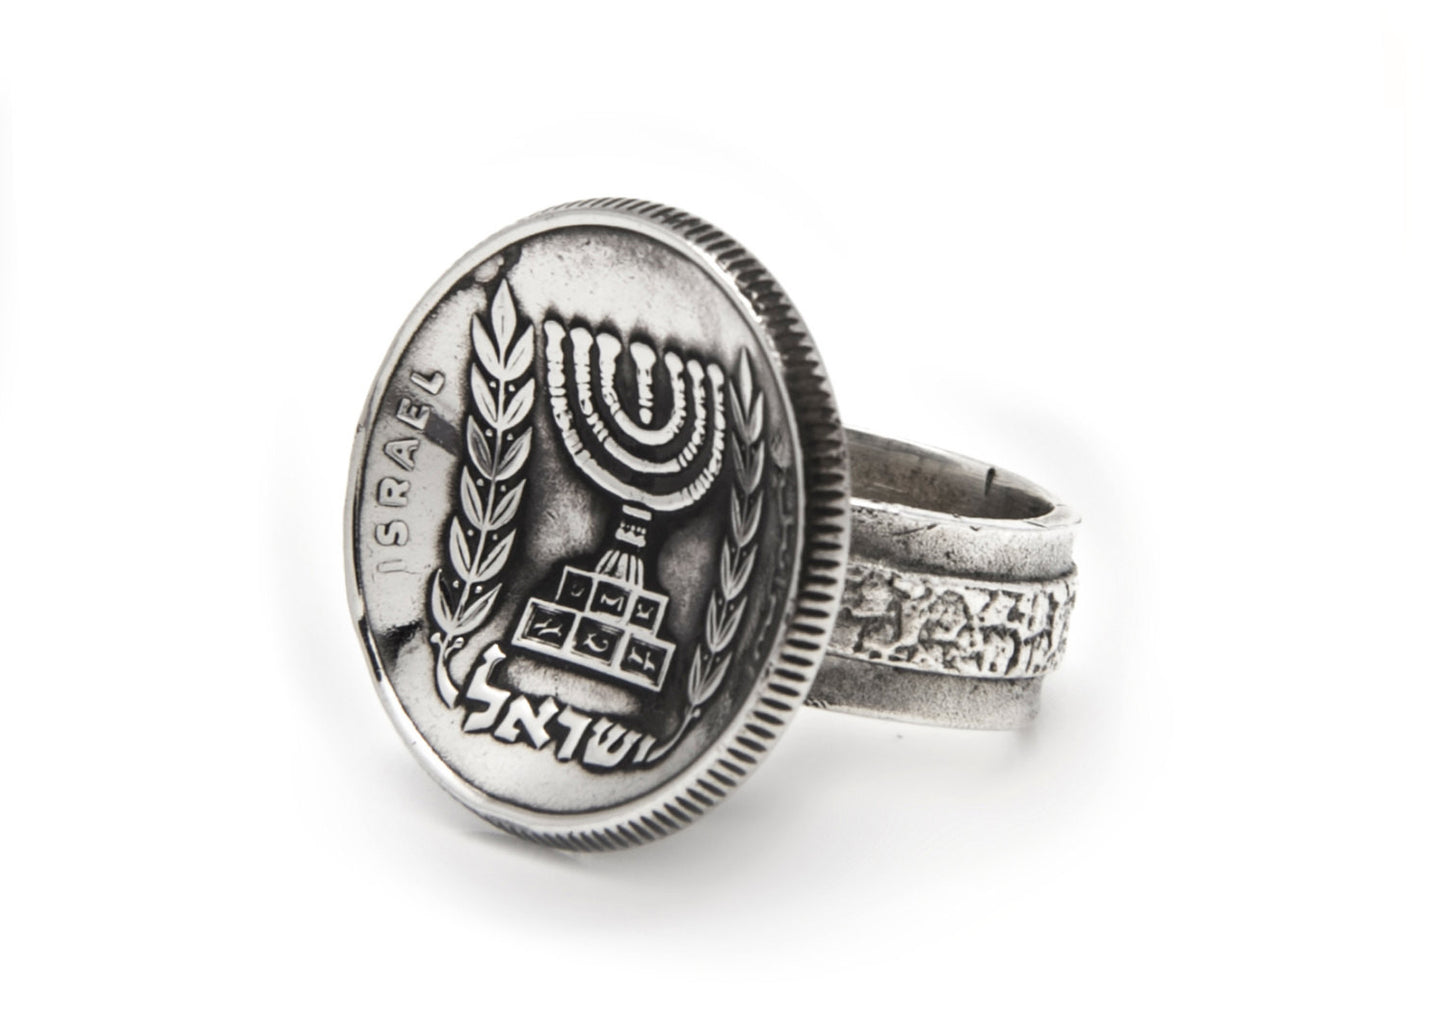 Israeli Old, Collector's Coin Ring - Old 1/2 pound Coin of Israel